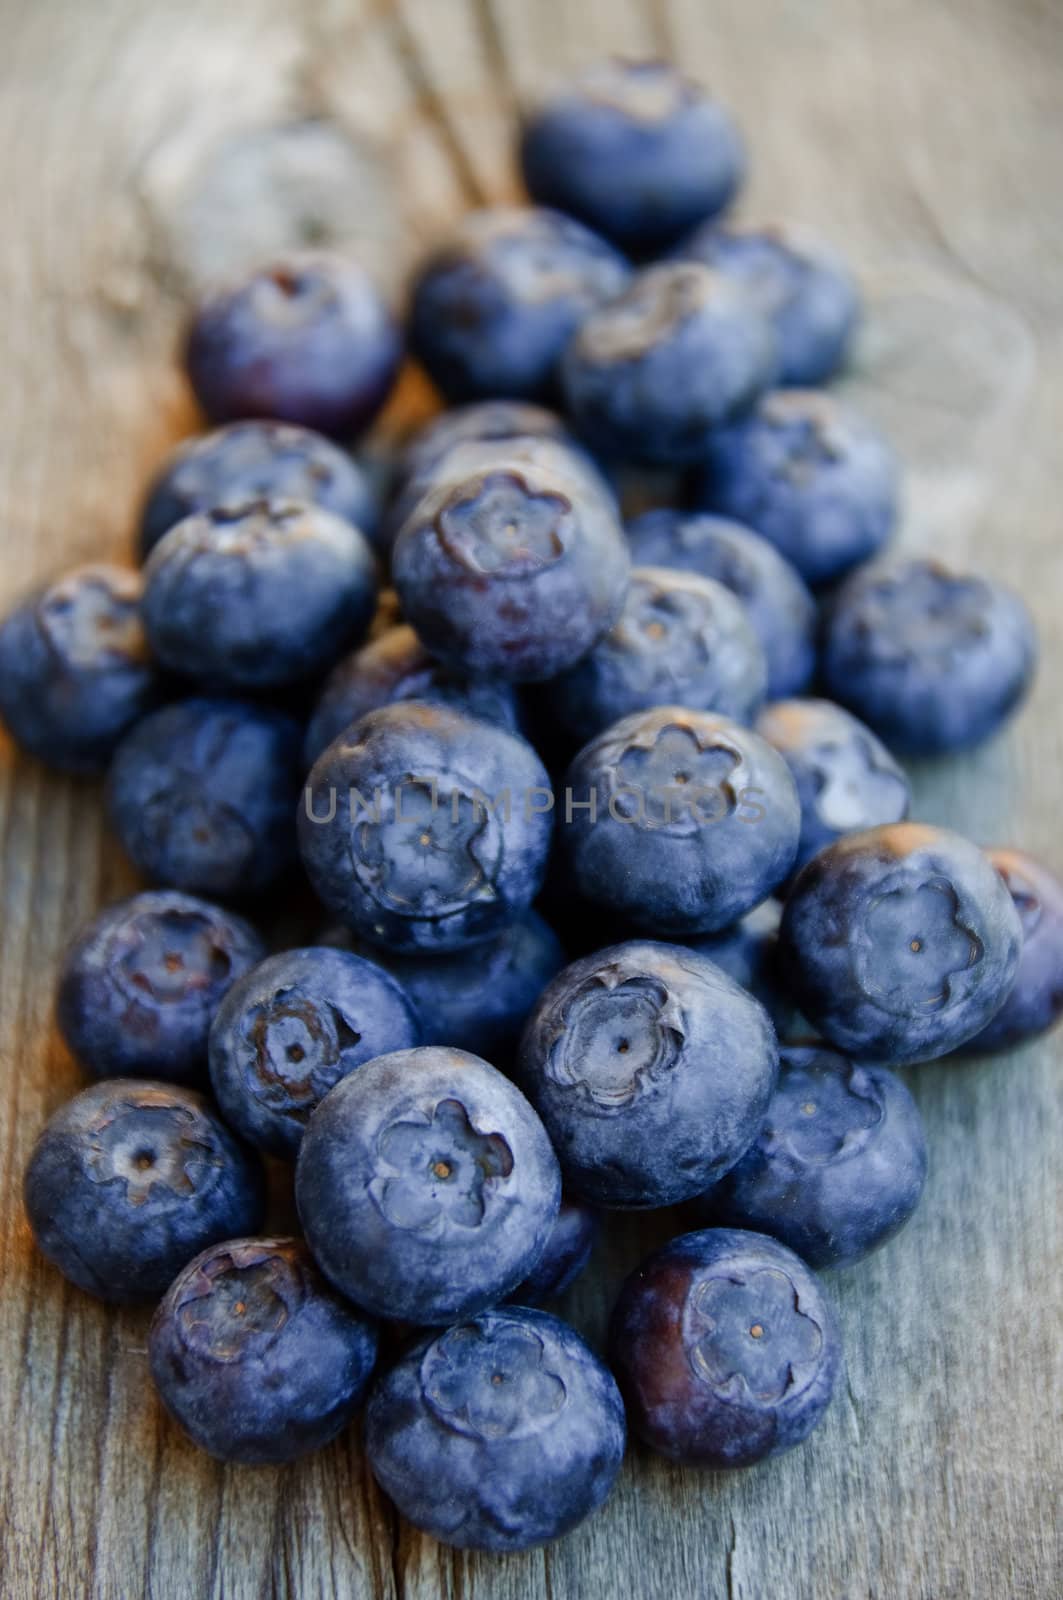 Blueberries on a wooden board